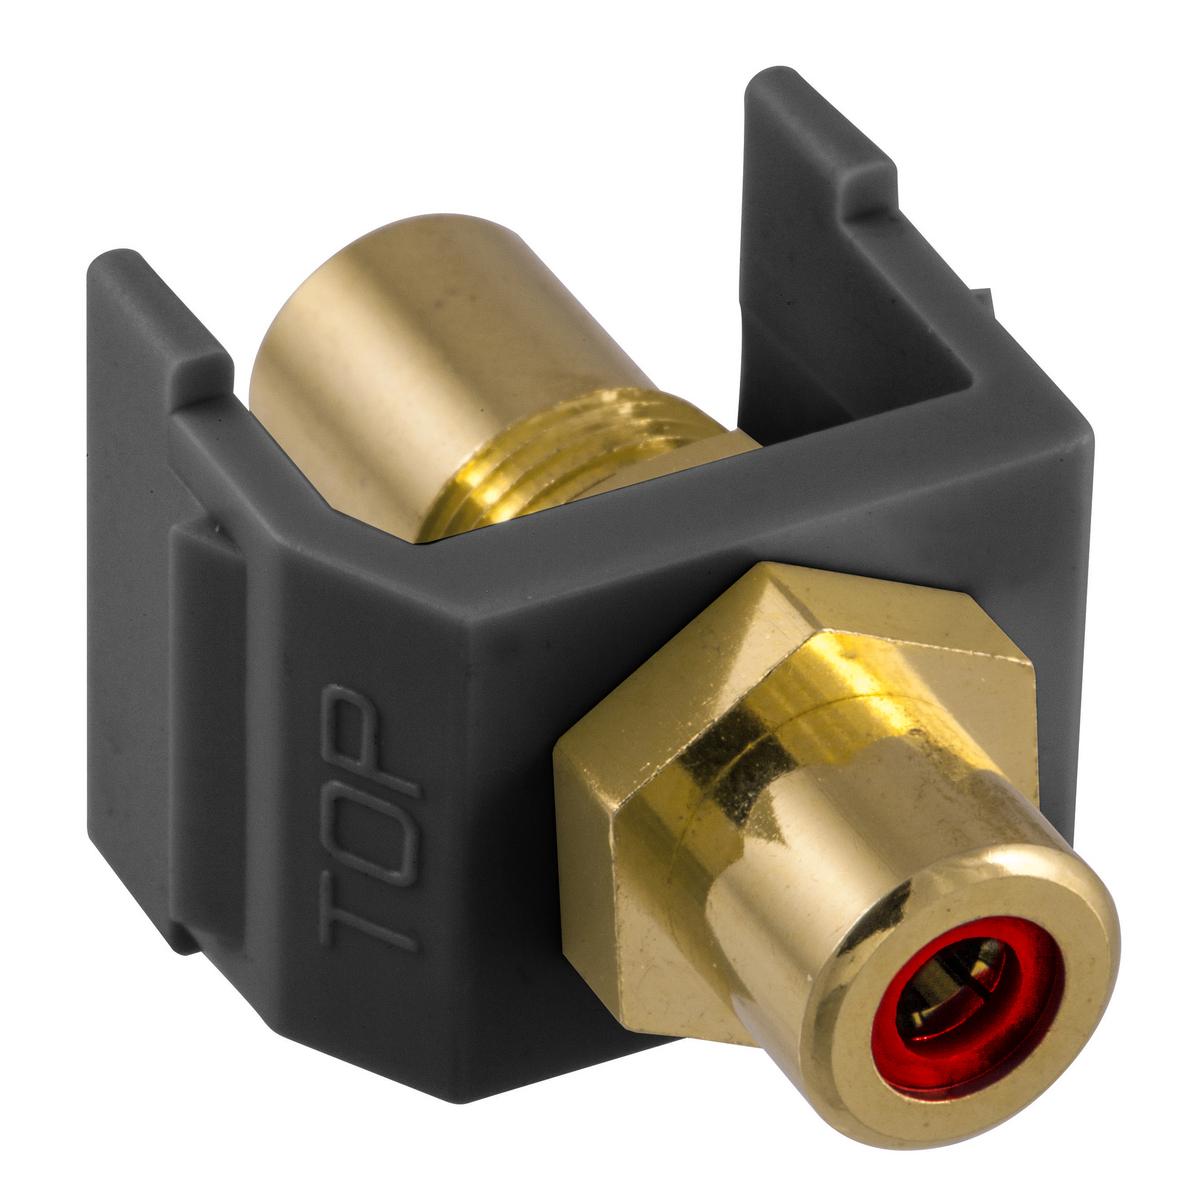 Hubbell SFRCRFFBK RCA Connector, Female to Female, Red Insulator, Black Housing  ; High quality Gold plating ; Seamless Hubbell system integration ; Deliver composite, component or digital signals ; Standard Product